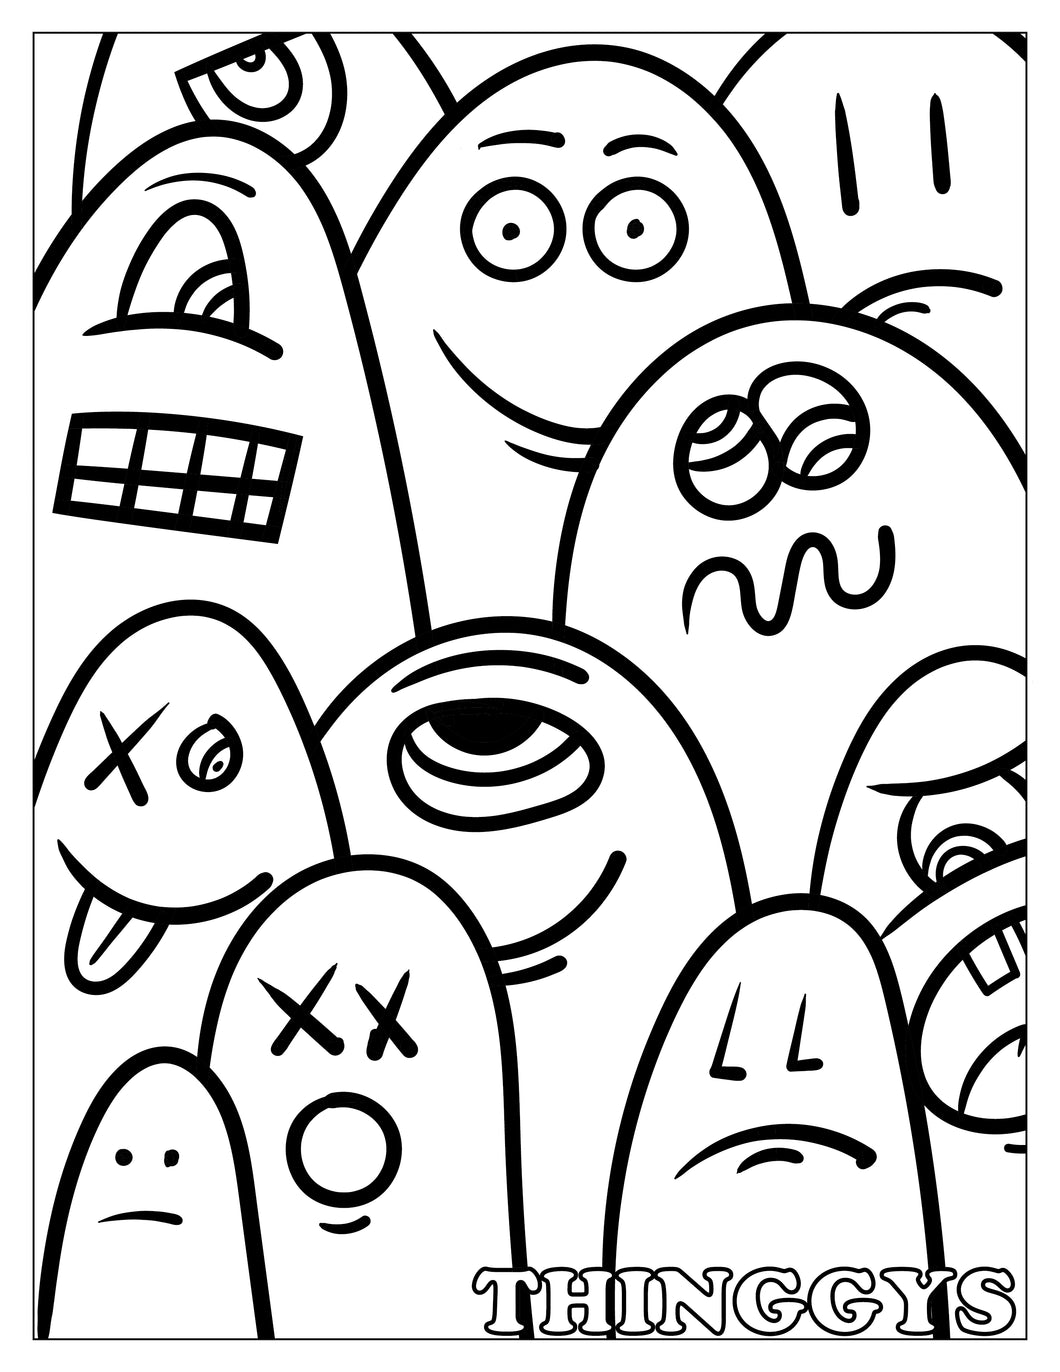 Thinggys - Free Coloring Page